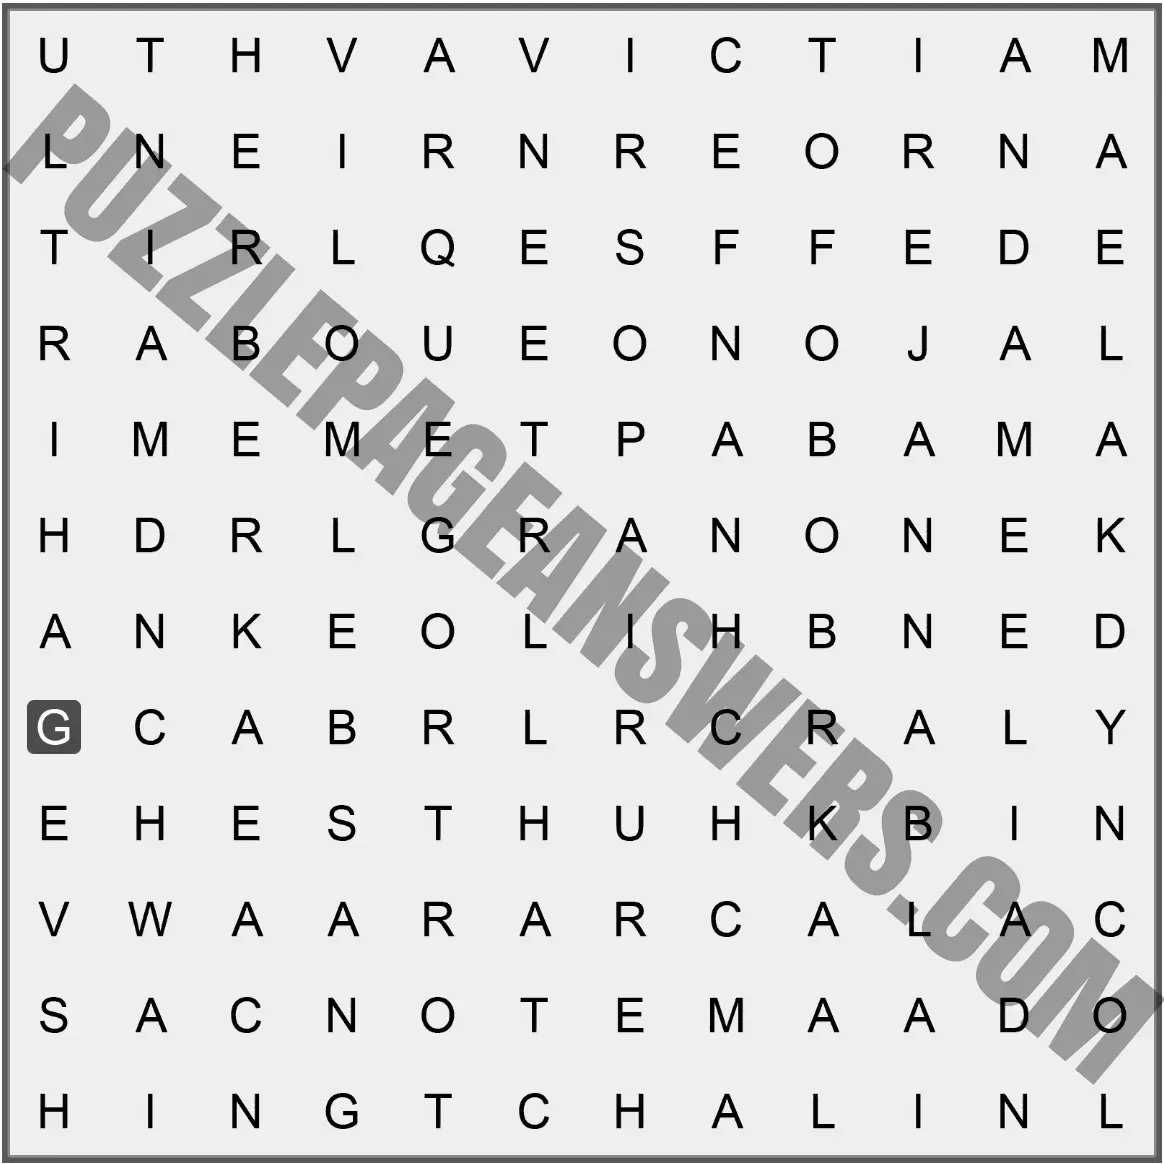 Puzzle Page Words Snake November 23 2019 PuzzlePageAnswers com